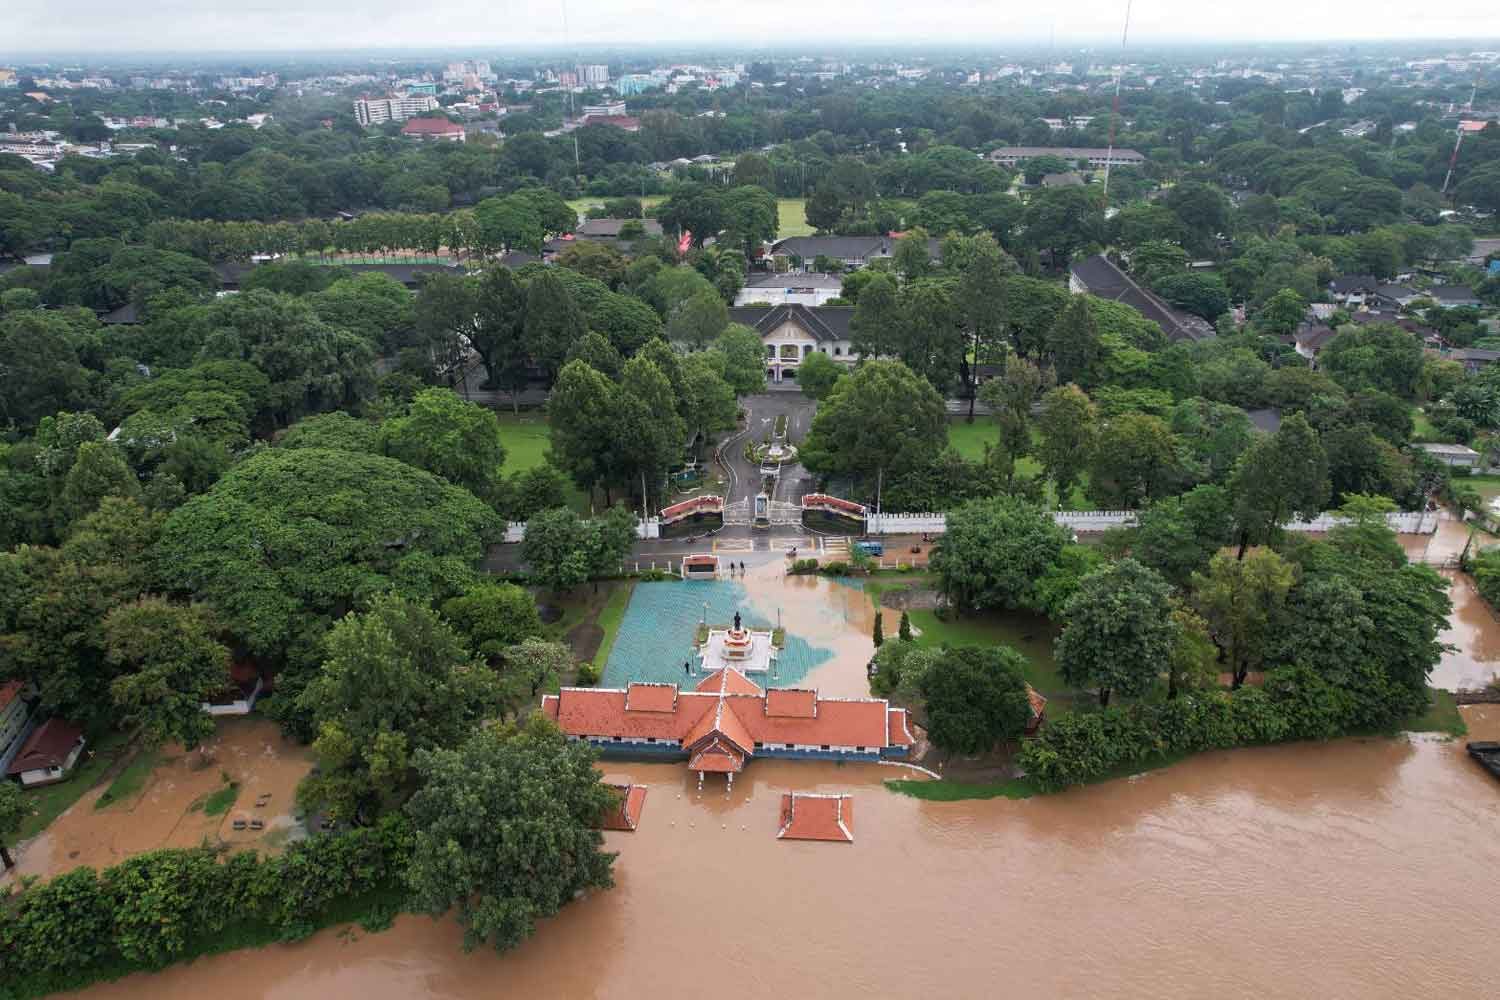 Flooding submerges central Chiang Mai